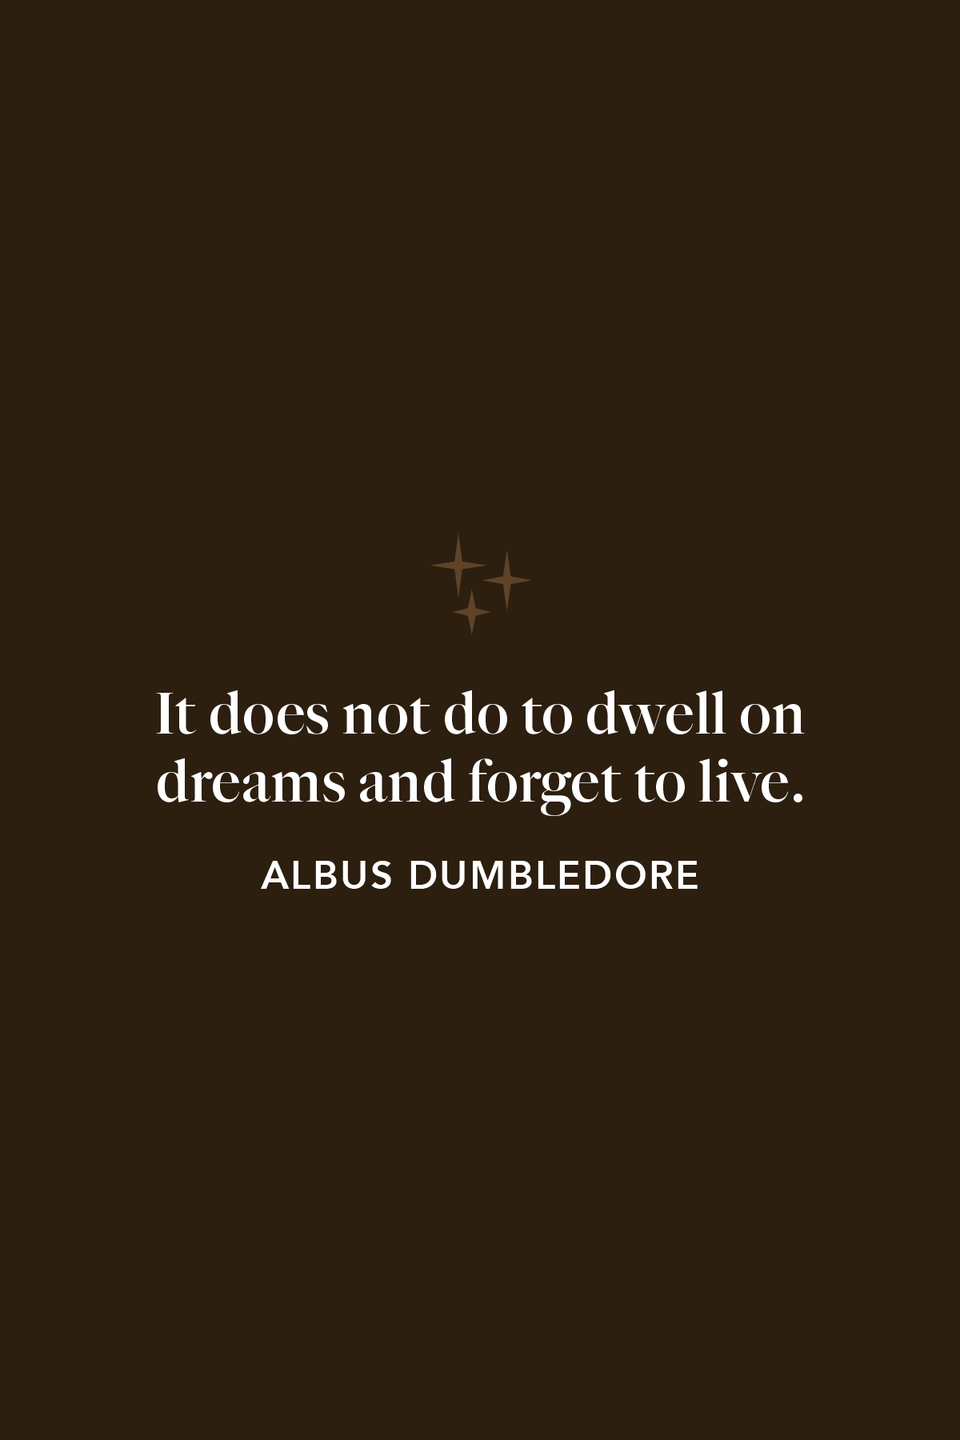 Dumbledore on living your life